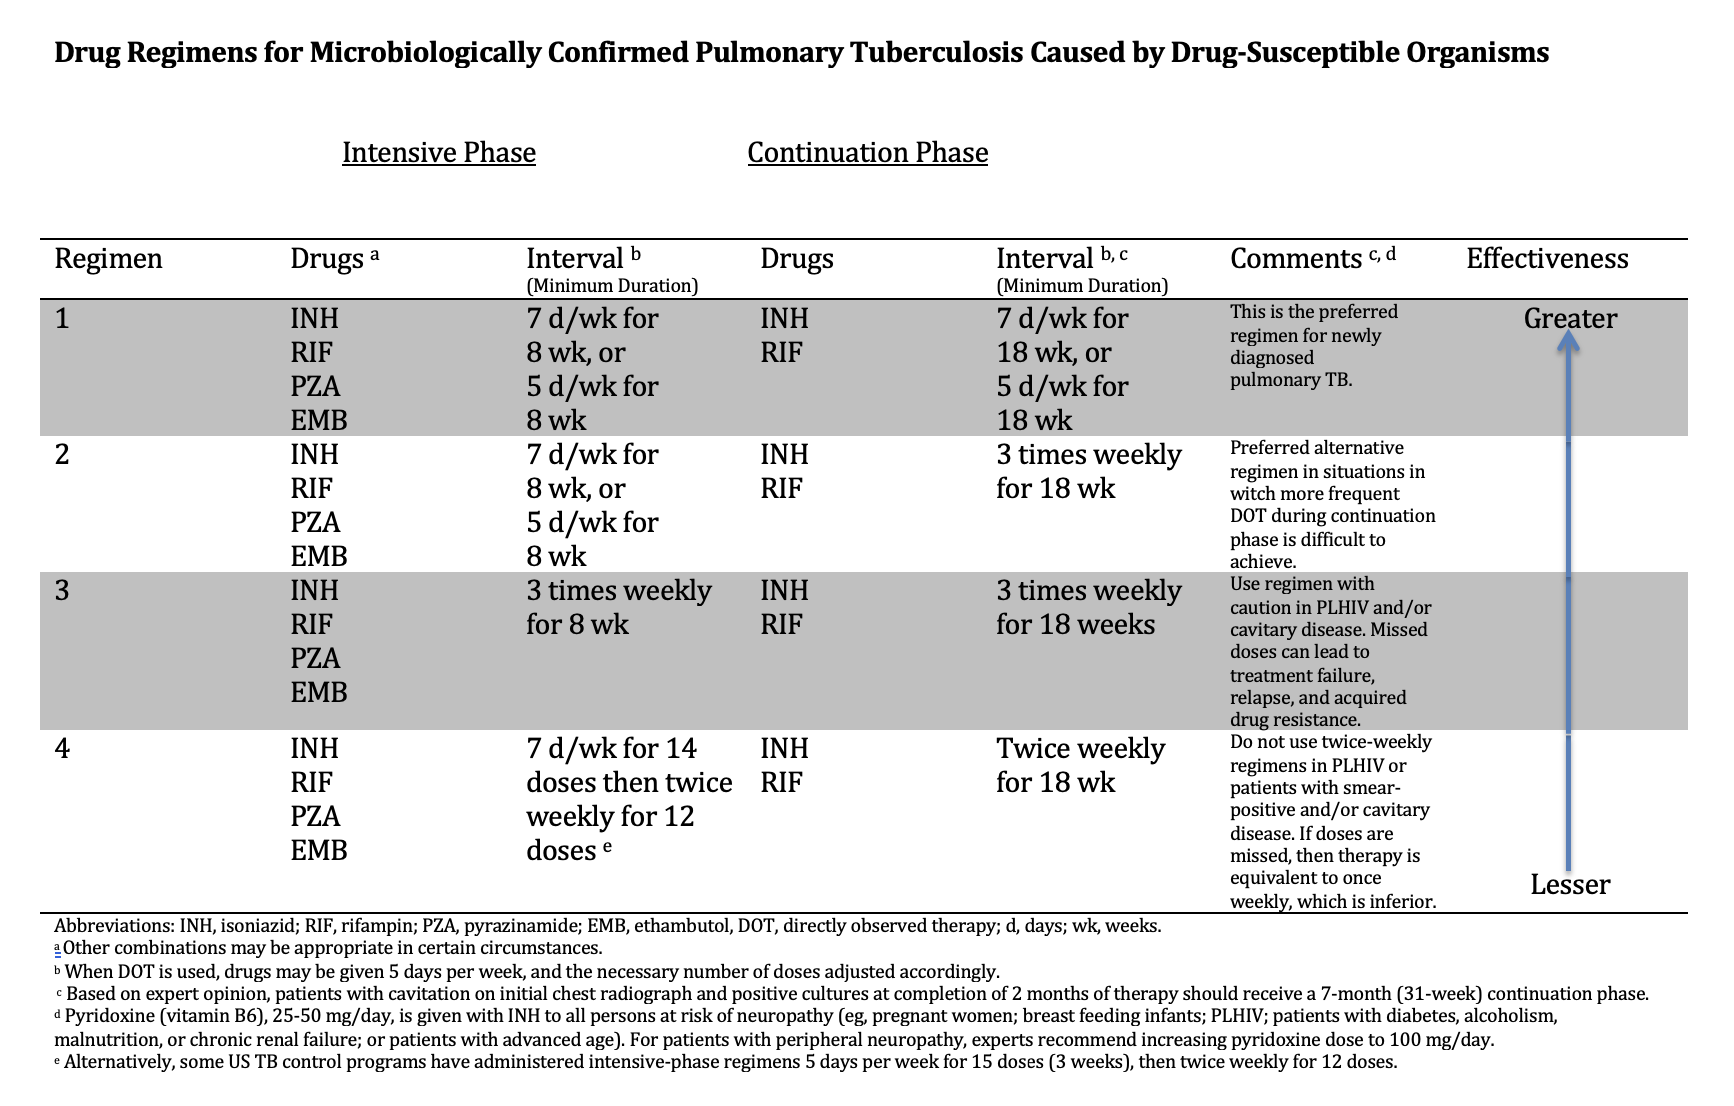 Drug Regimens for Microbiologically Confirmed Pulmonary Tuberculosis Caused by Drug-Susceptible Organisms